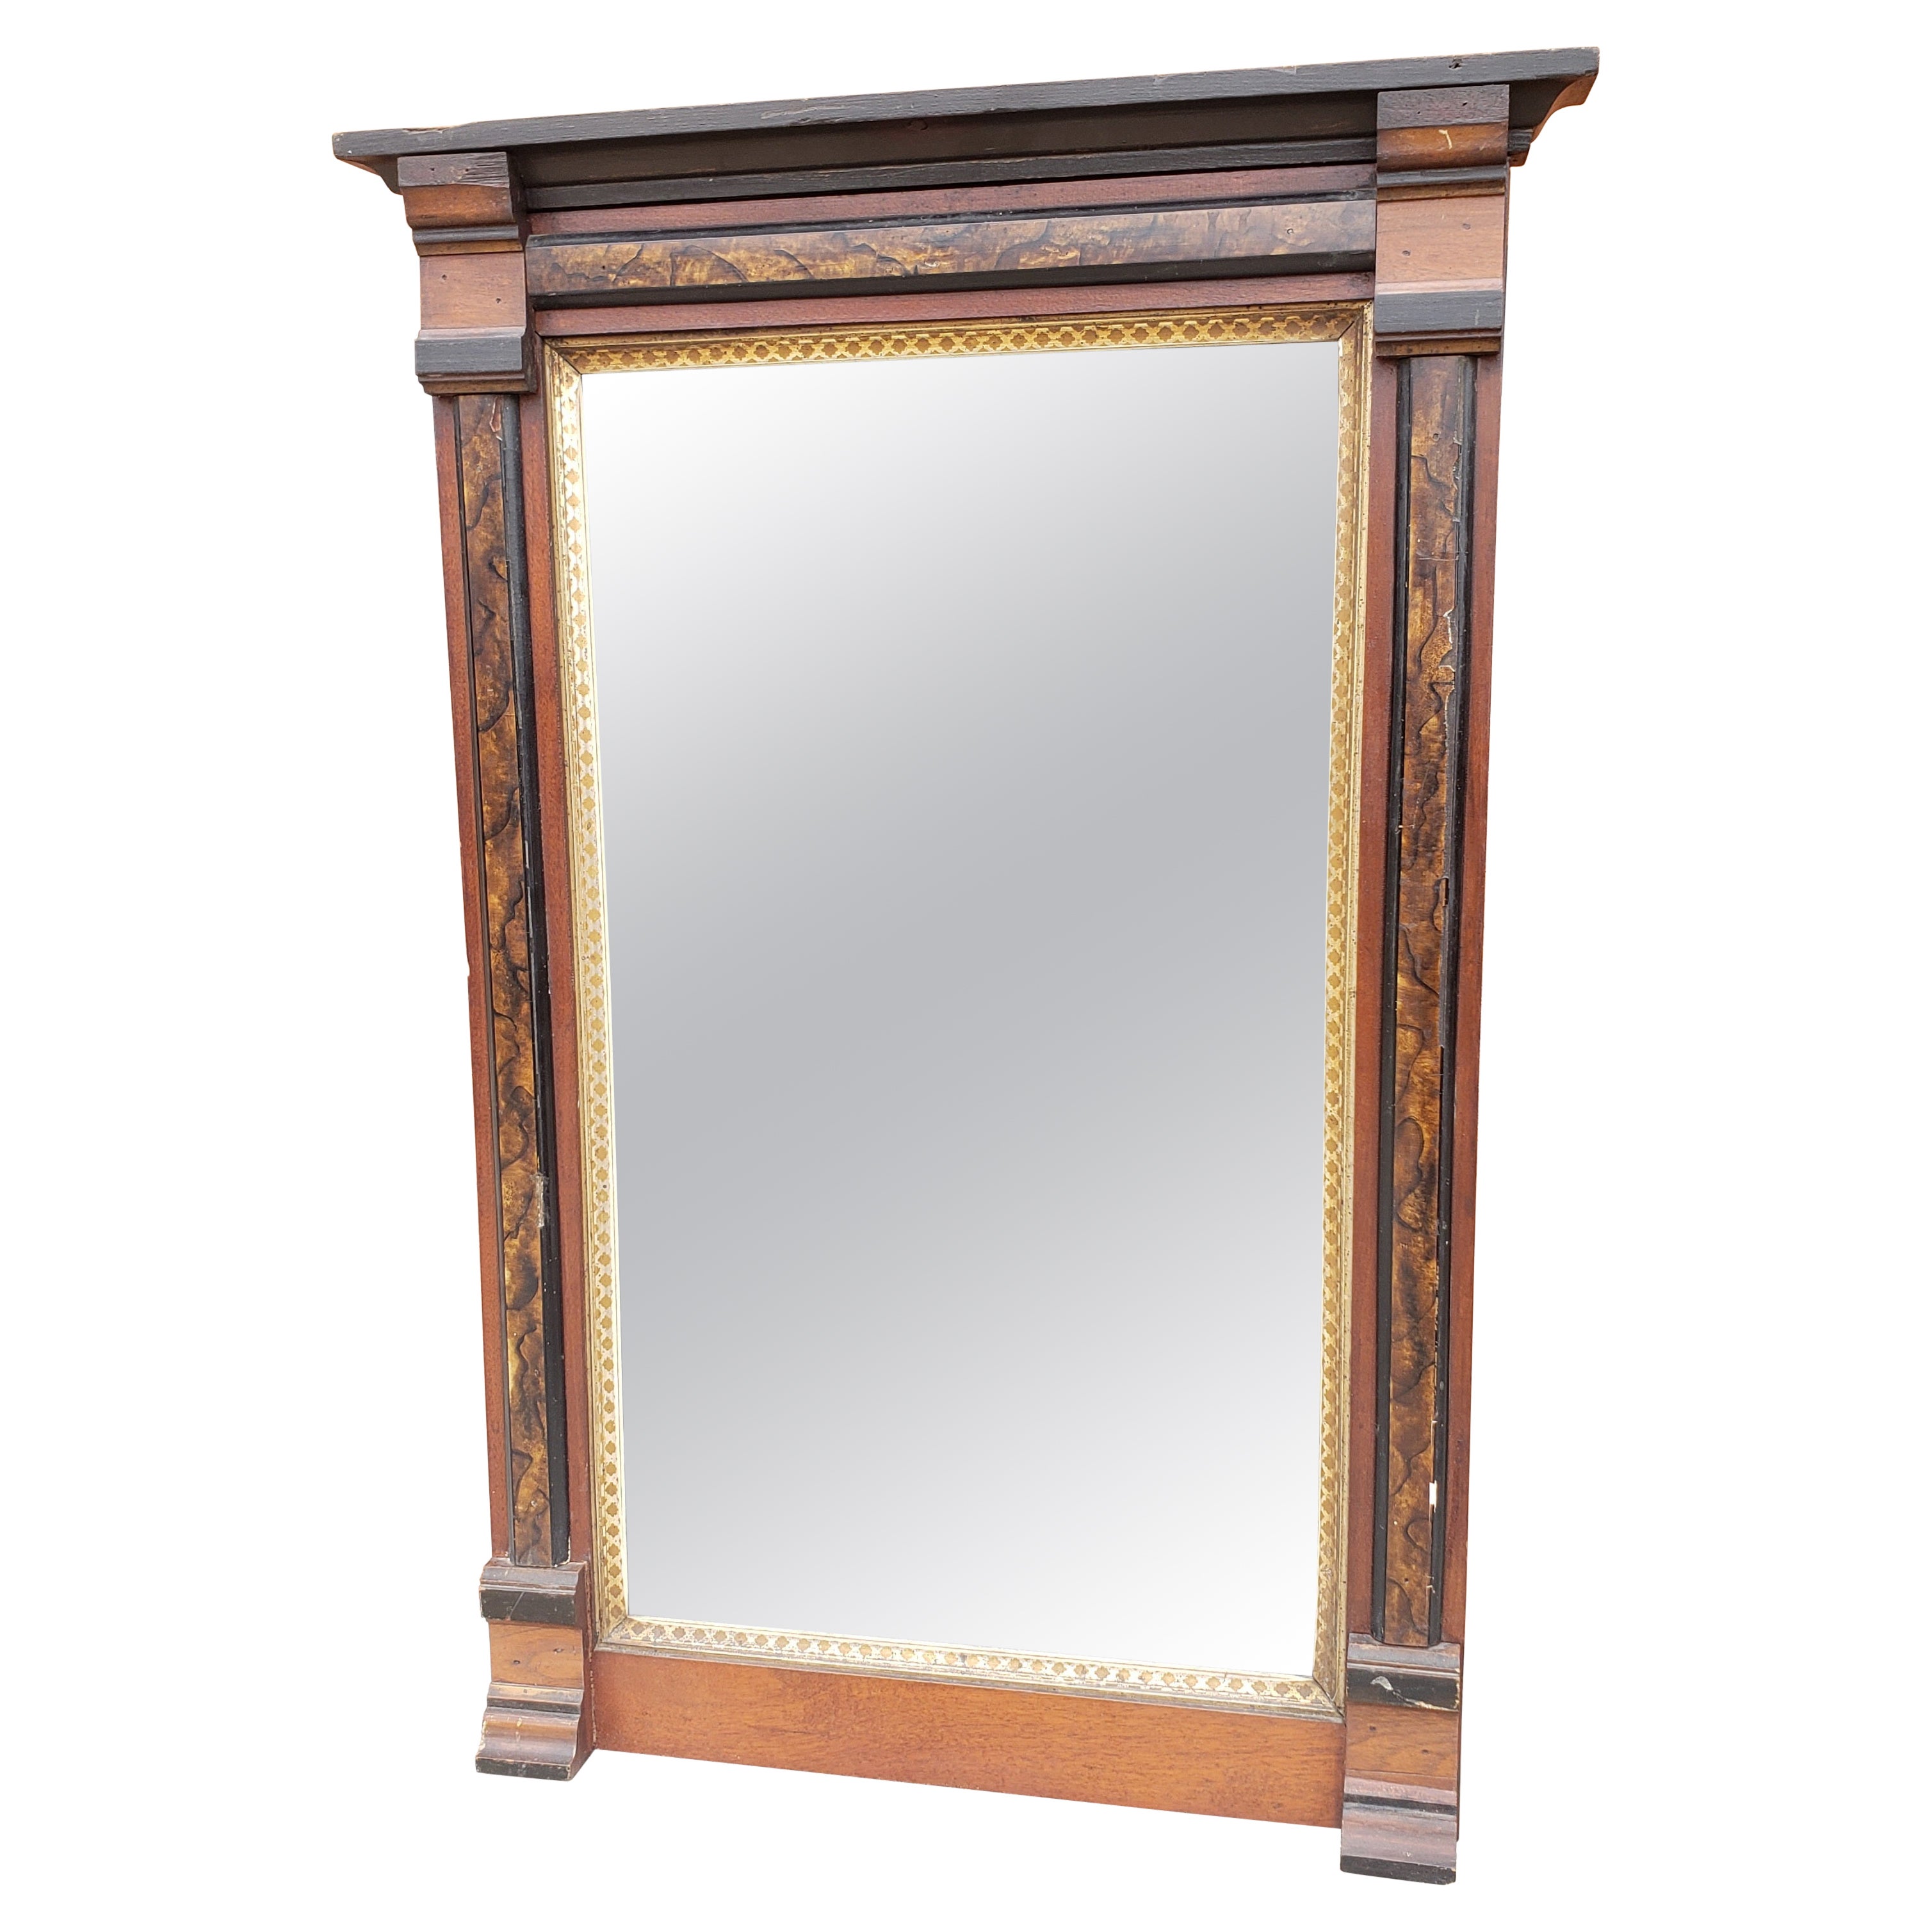 1890s American Classical Parcel Ebonized Mahogany Wall Mirror For Sale